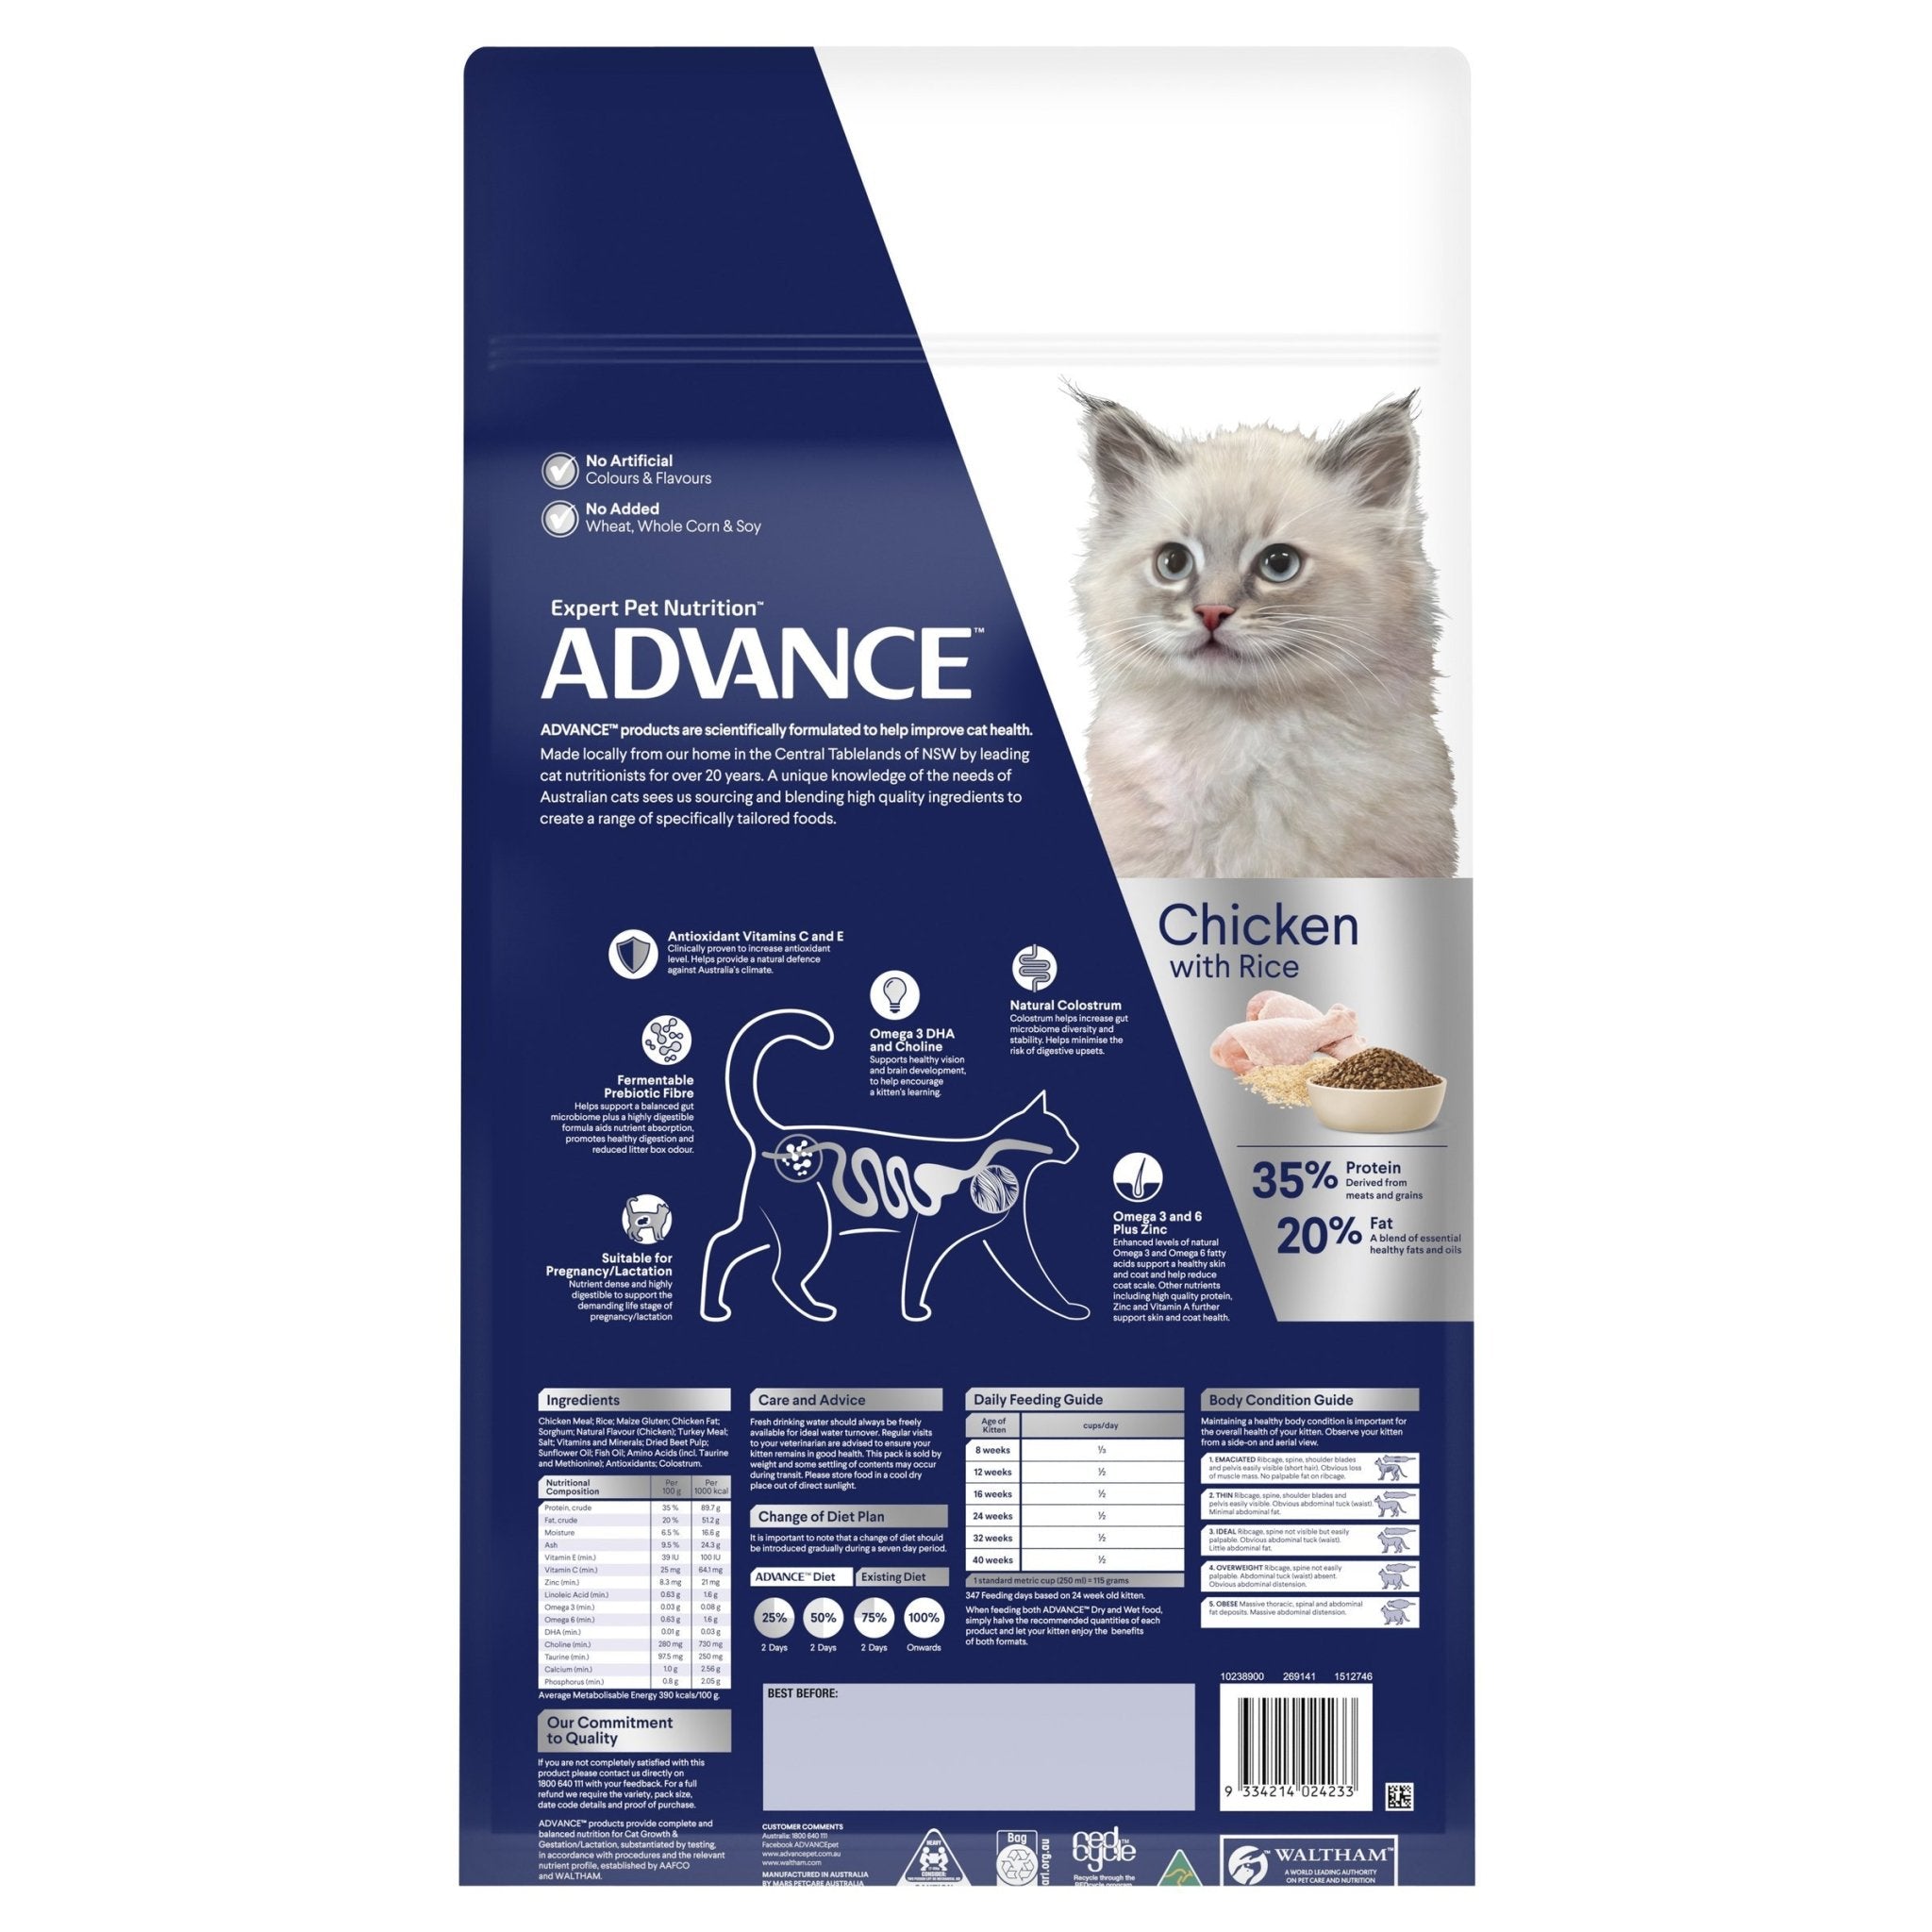 ADVANCE Kitten Dry Cat Food Chicken with Rice